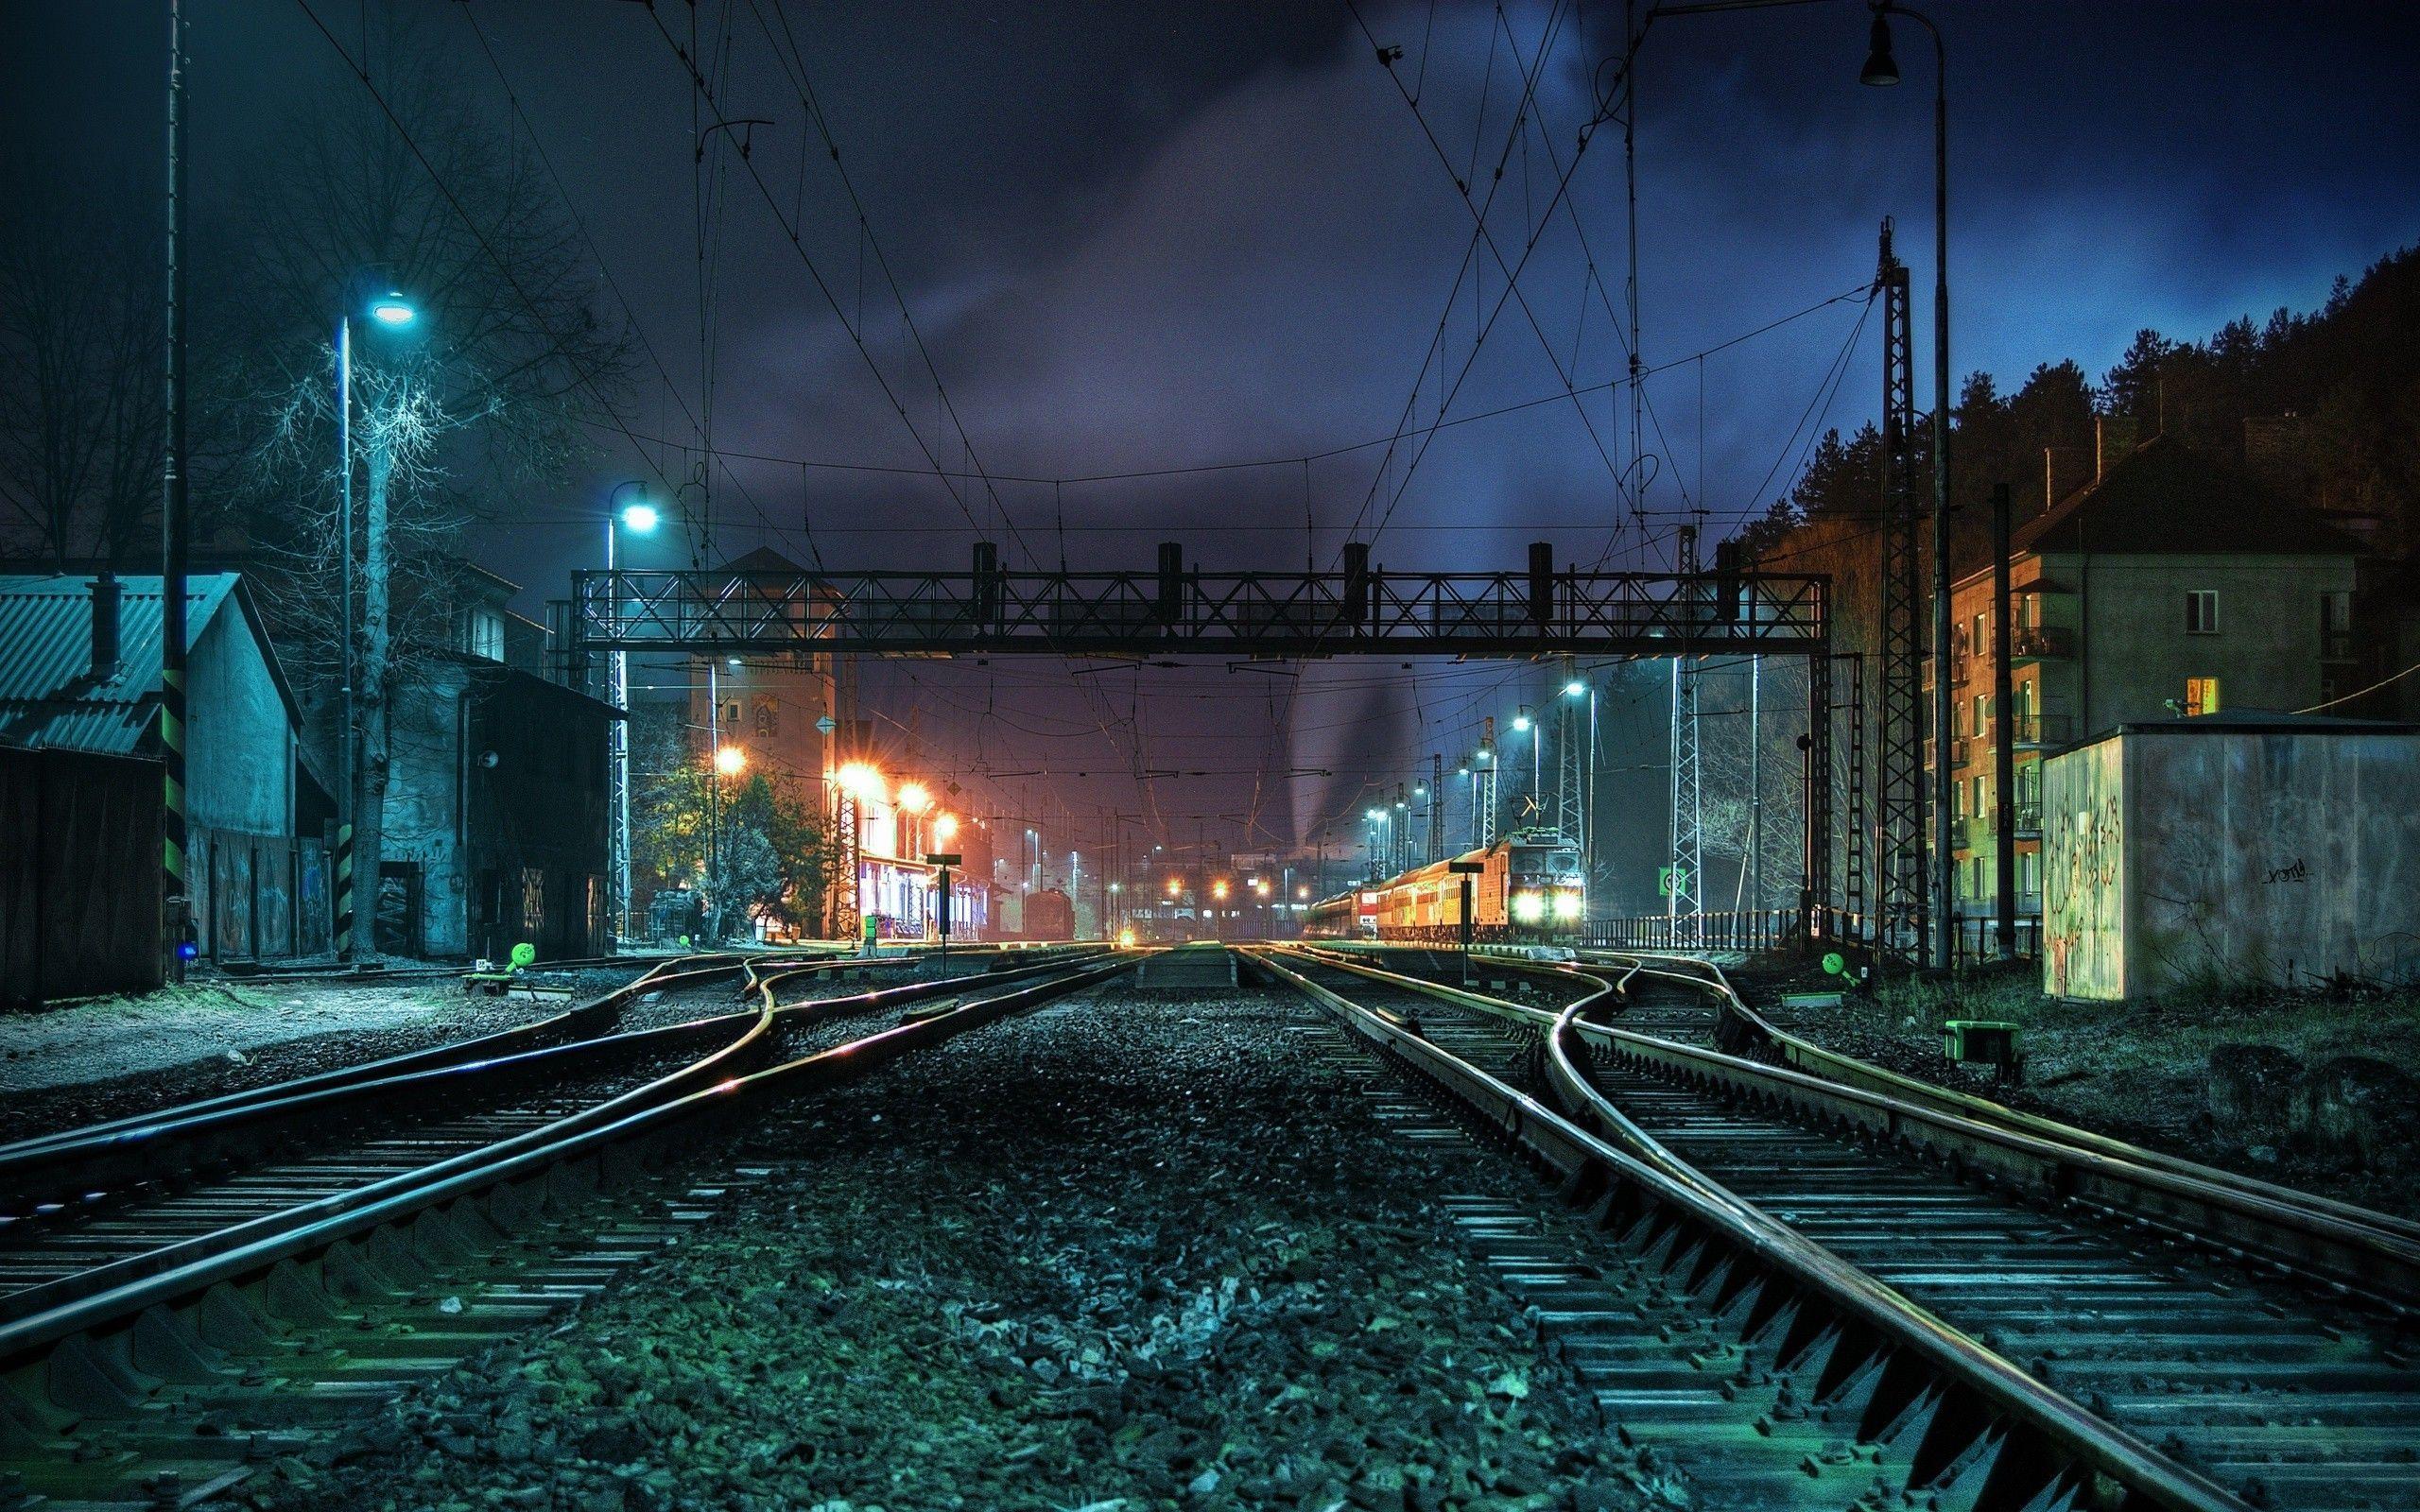 Image detail for -Night Lights Photography Railroad Tracks Railroads